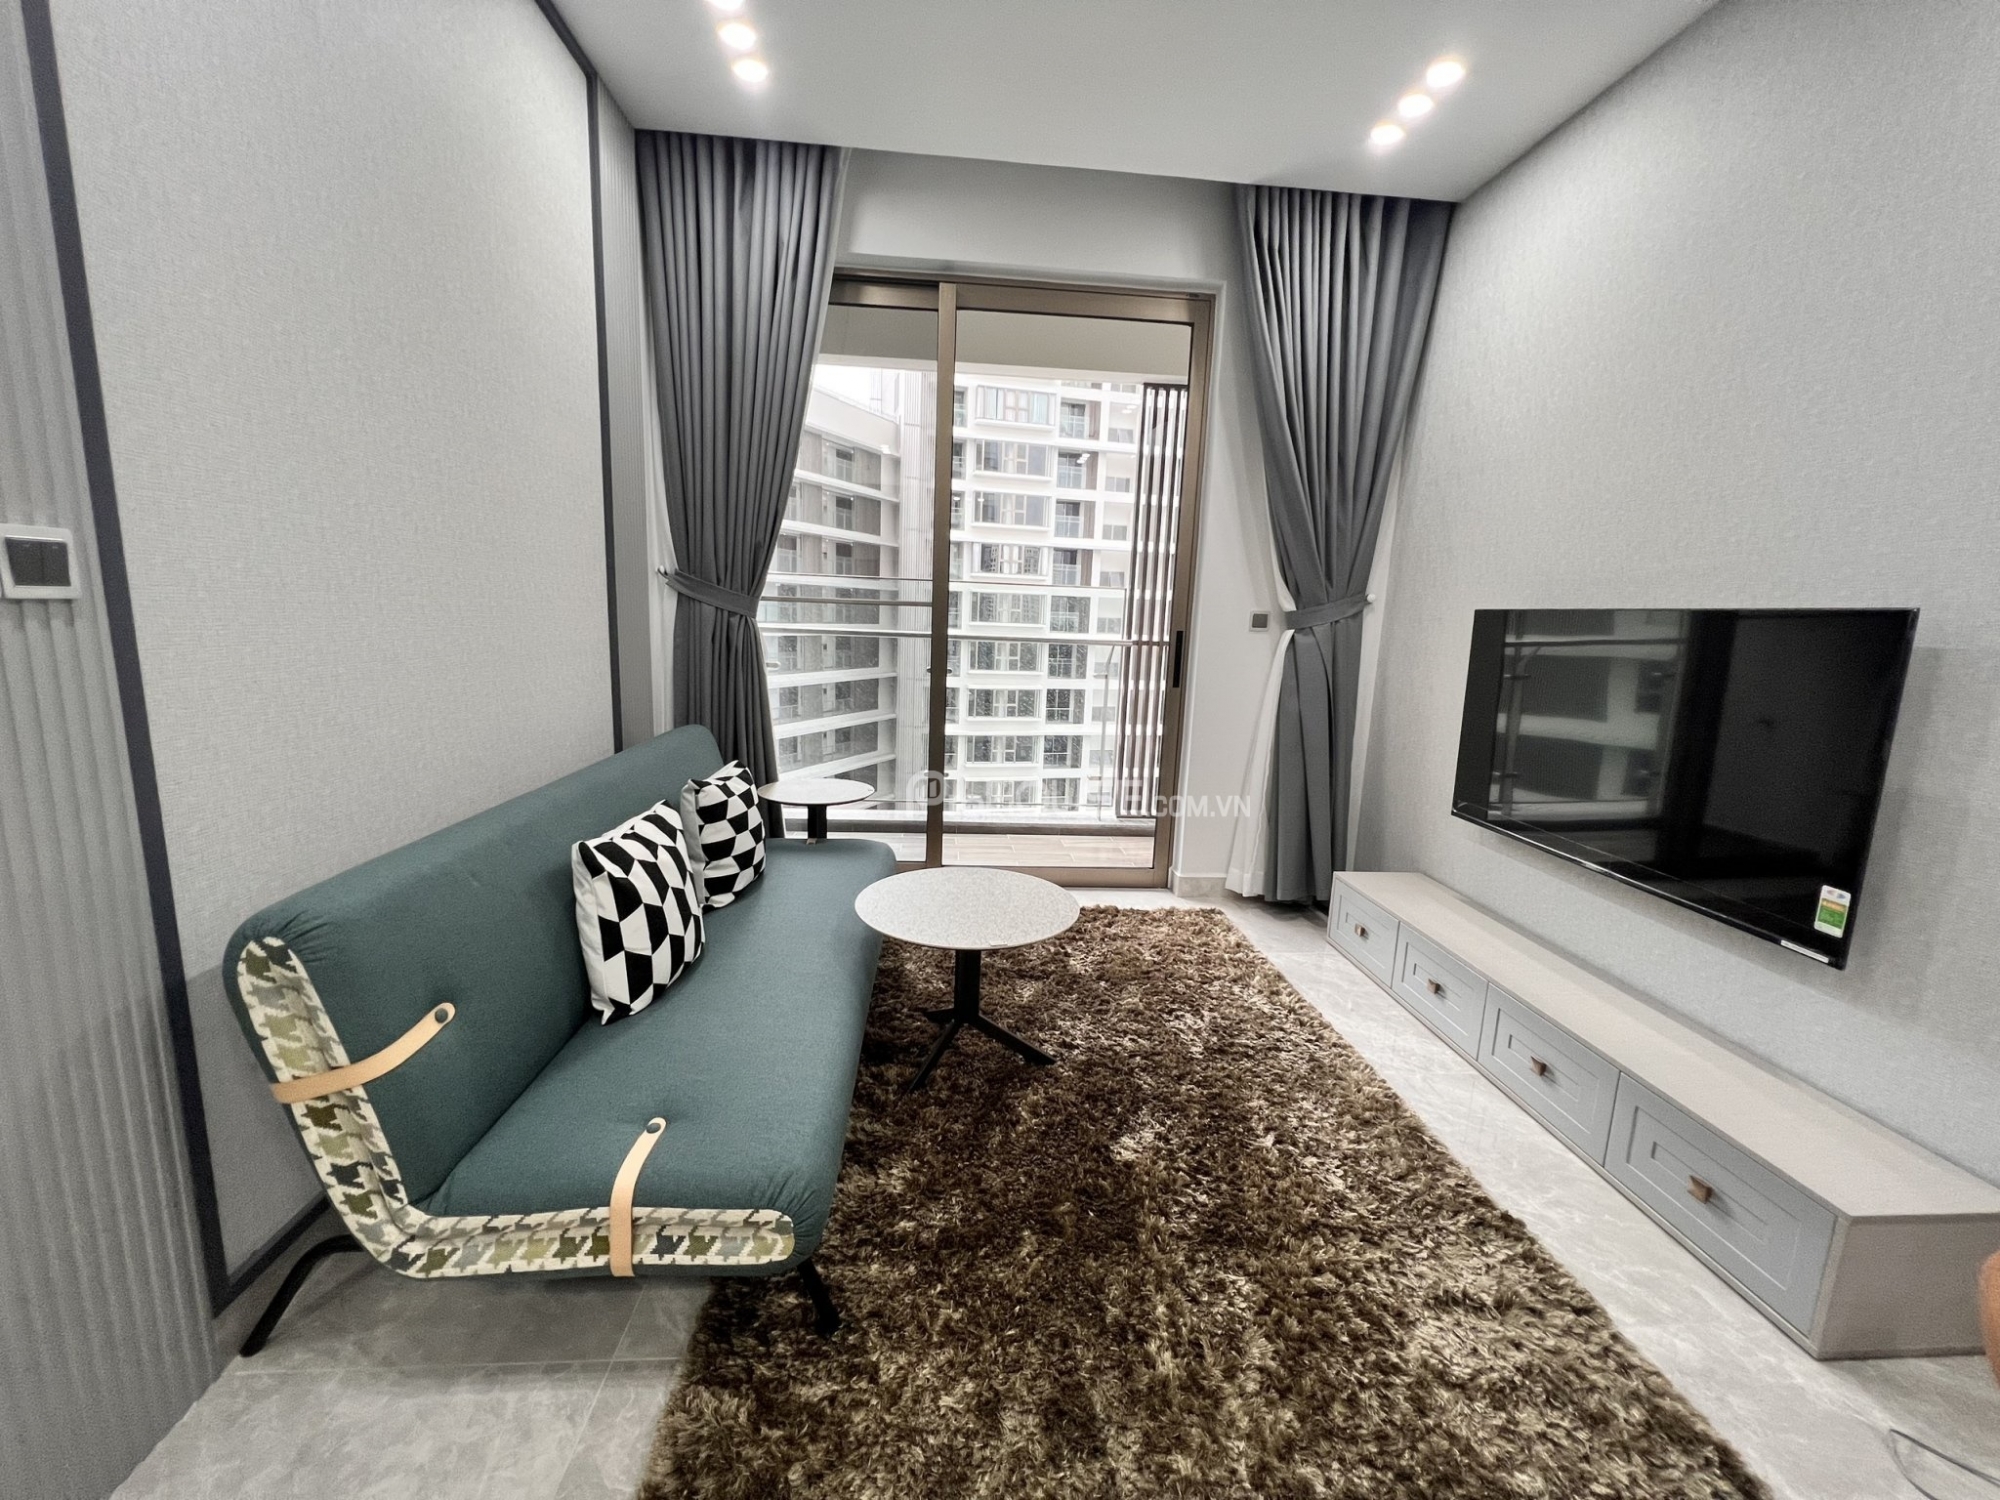 2-bedroom luxury apartment for rent in Midtown Phu My Hung with full furniture